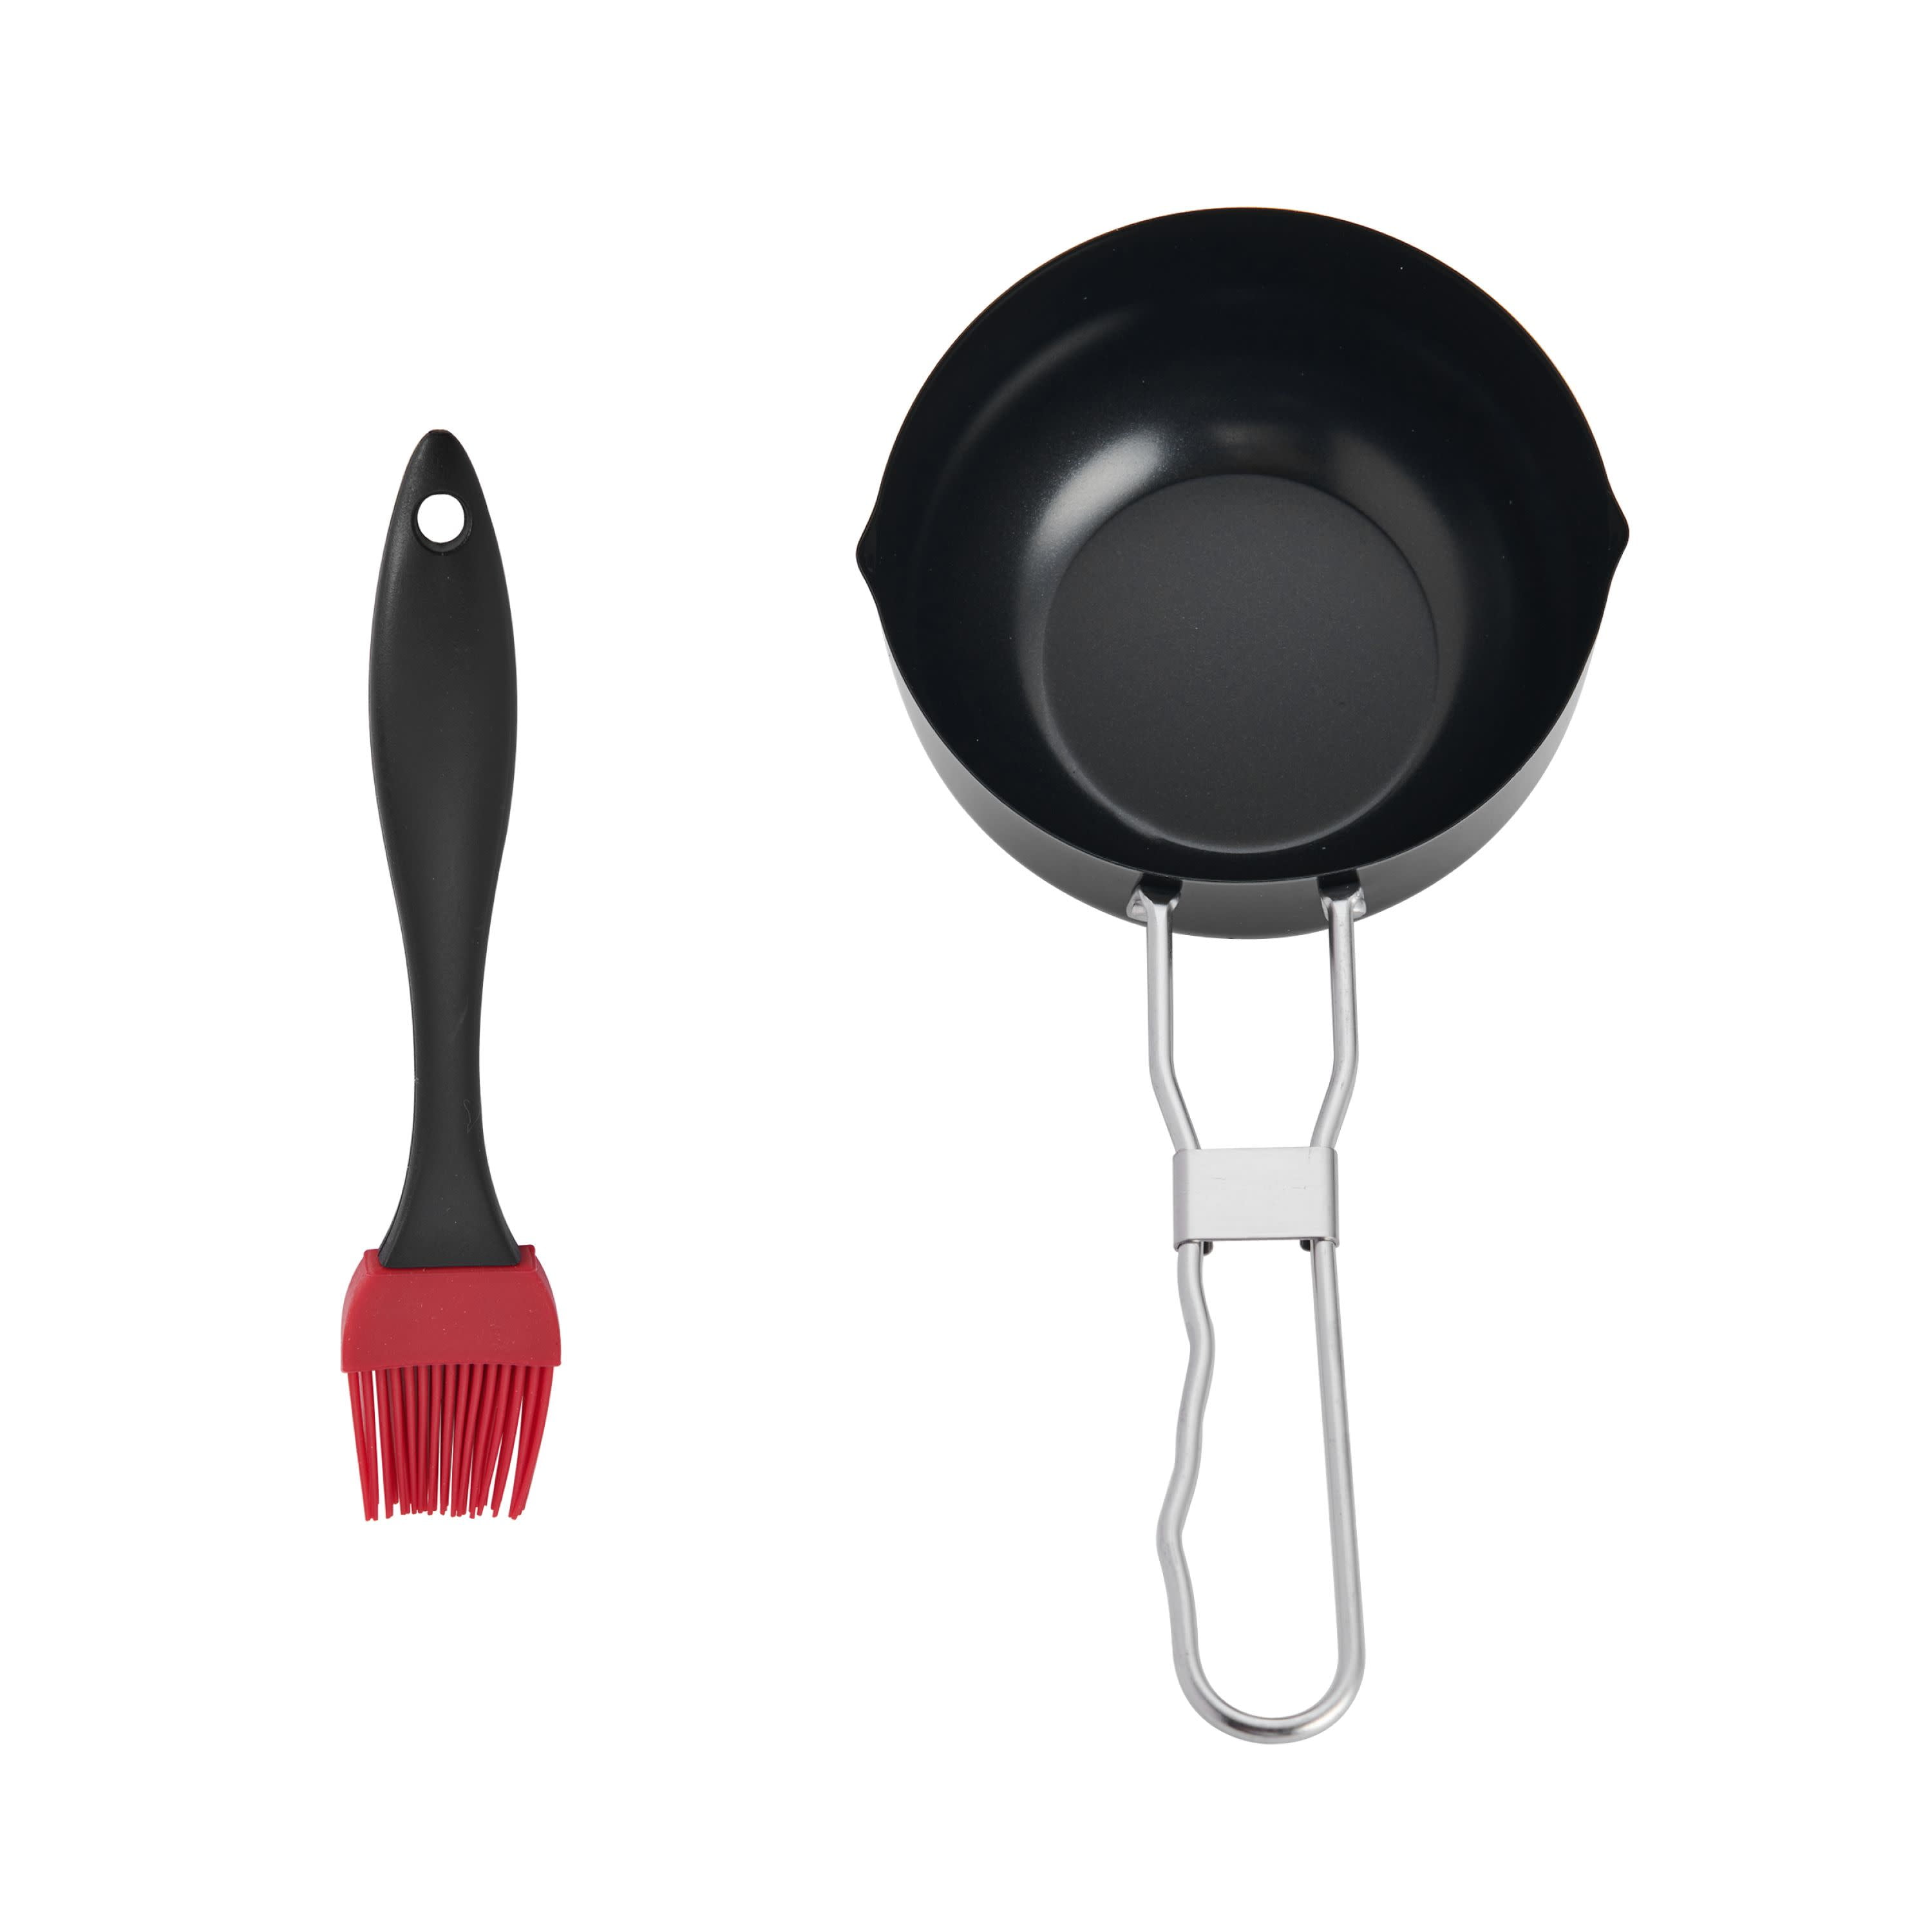 Farberware Professional Silicone Basting Brush Red with Black Handle